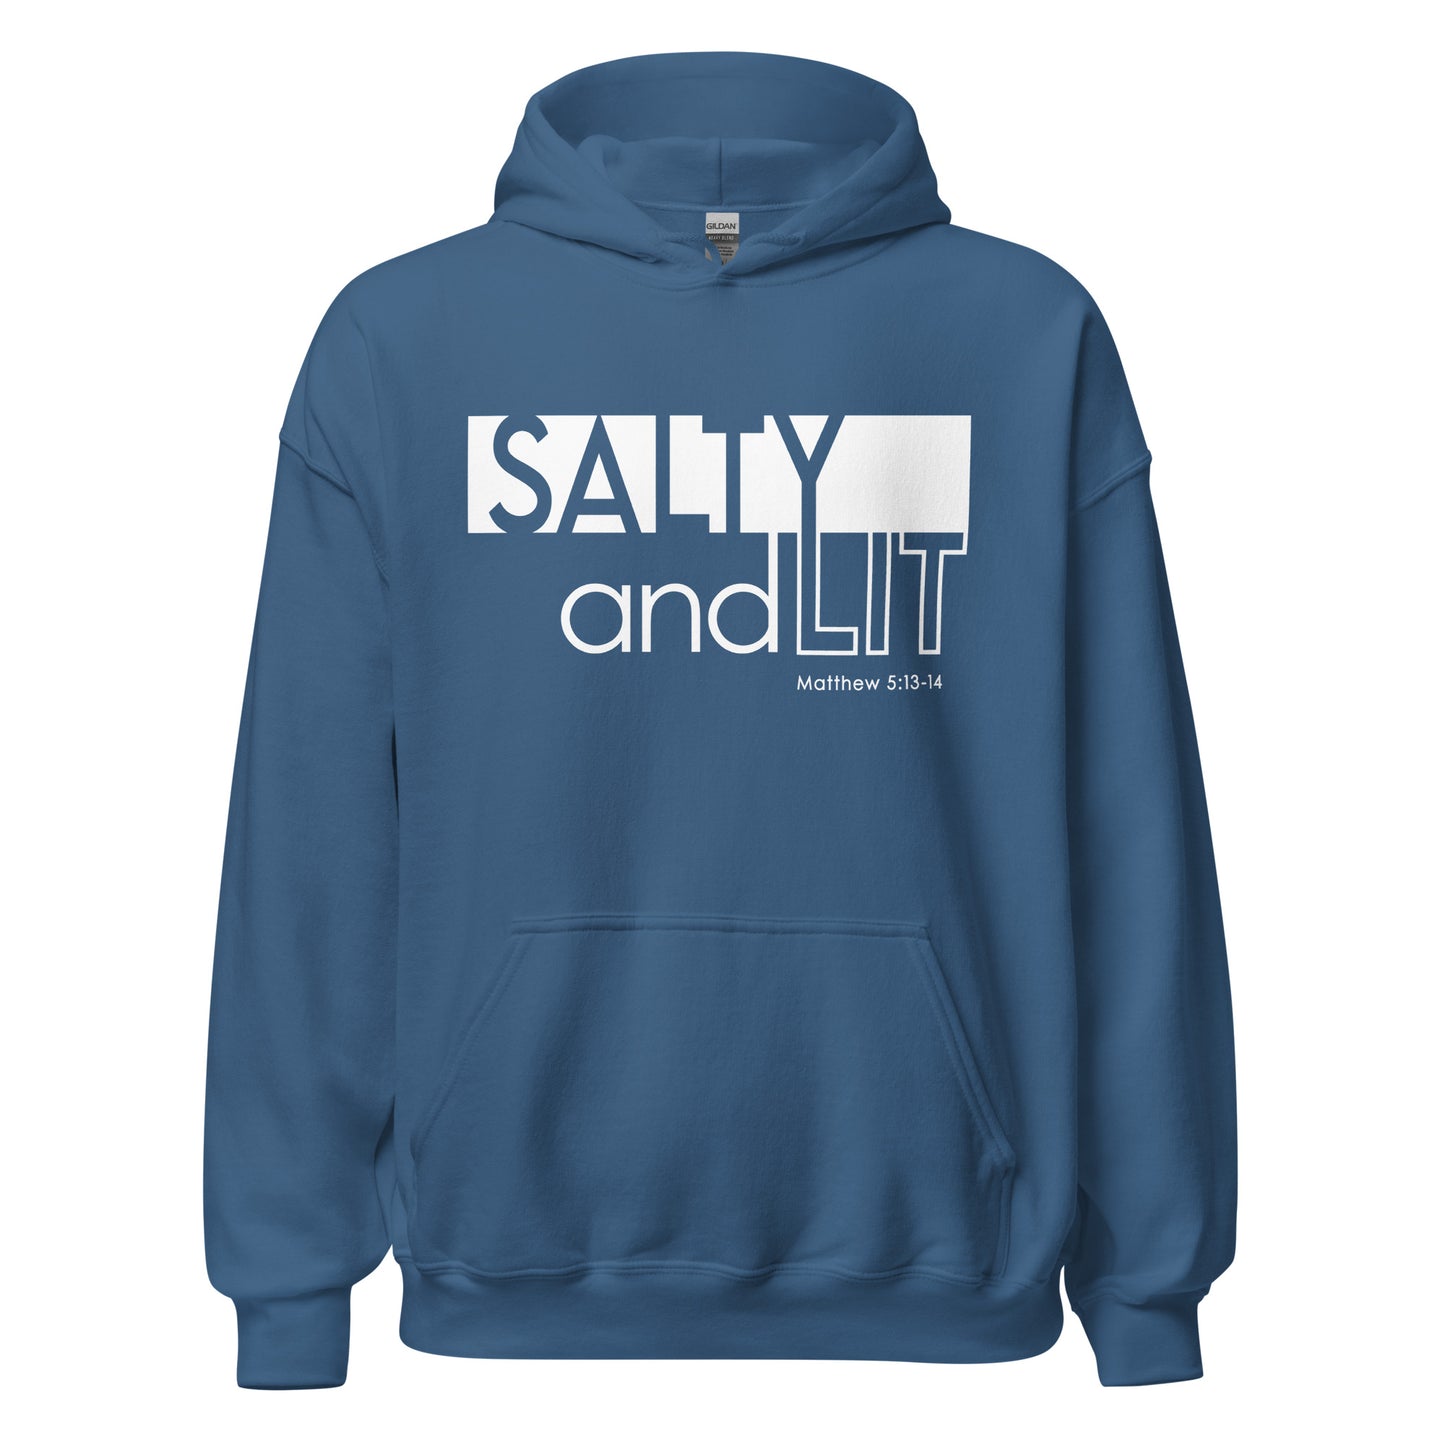 Funny Christian aesthetic Salty And Lit Matthew 5:13-14 bible verse unisex cozy indigo blue hoodie for men and women